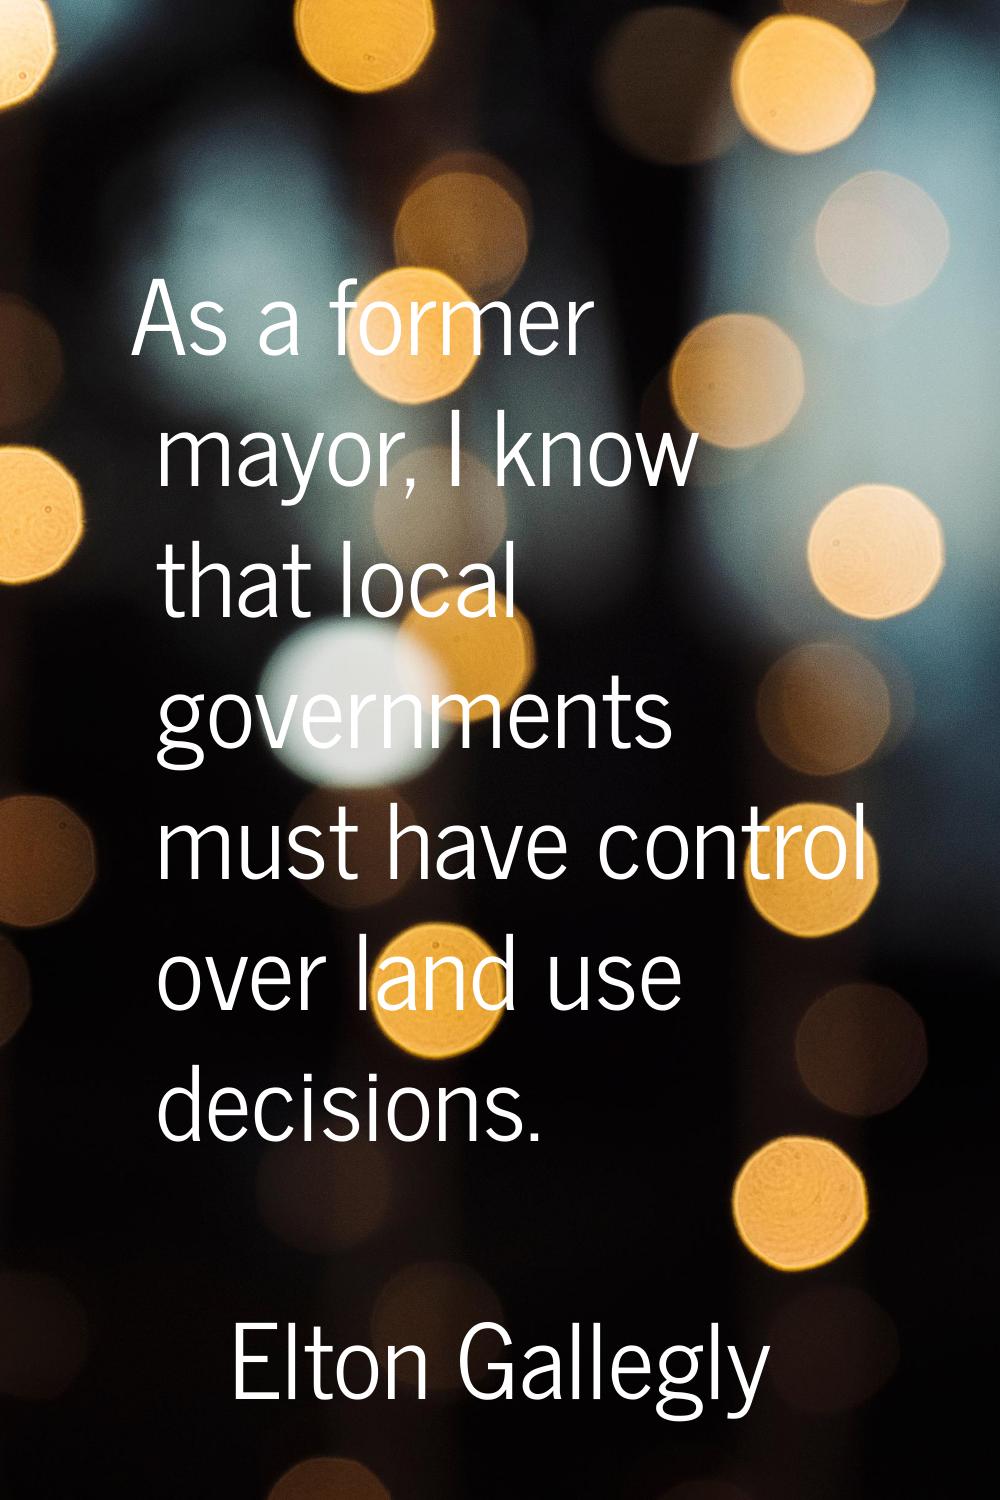 As a former mayor, I know that local governments must have control over land use decisions.